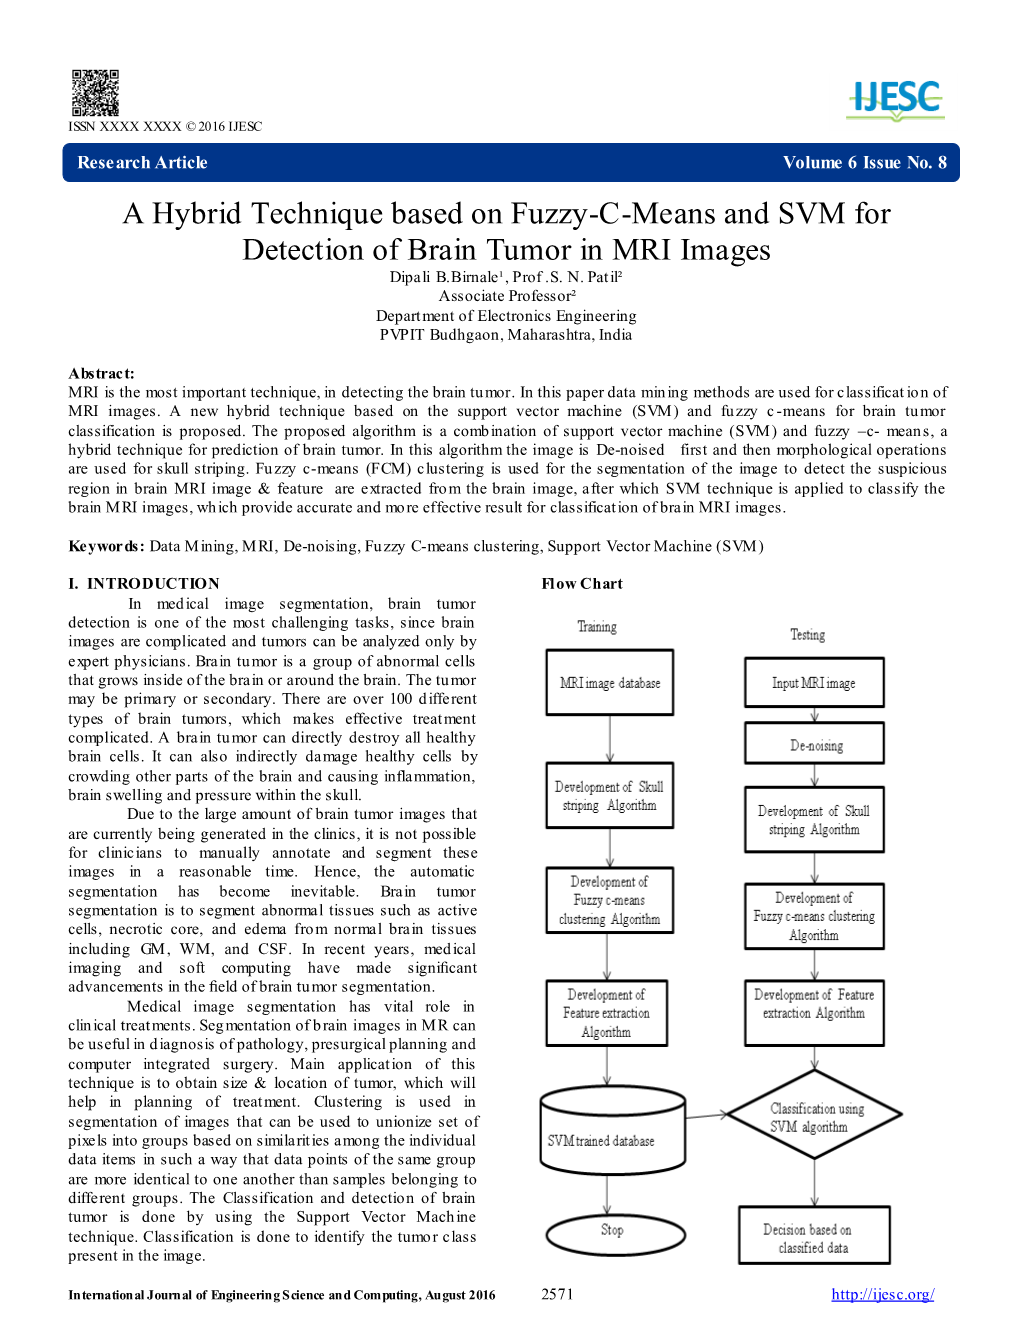 A Hybrid Technique Based on Fuzzy-C-Means and SVM for Detection of Brain Tumor in MRI Images Dipali B.Birnale¹, Prof .S